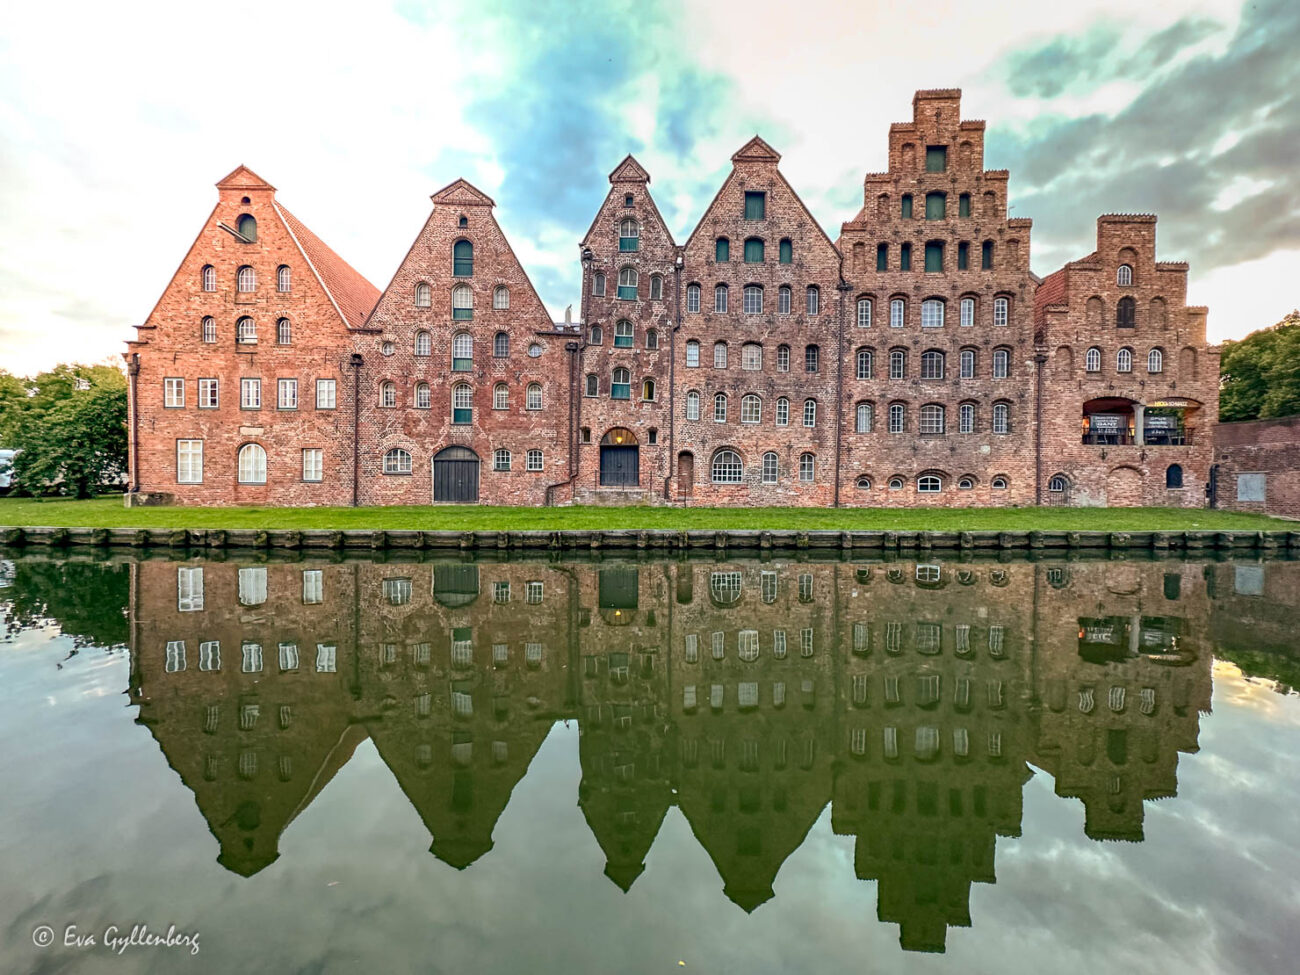 The salt warehouses in Lubeck with a mirror image